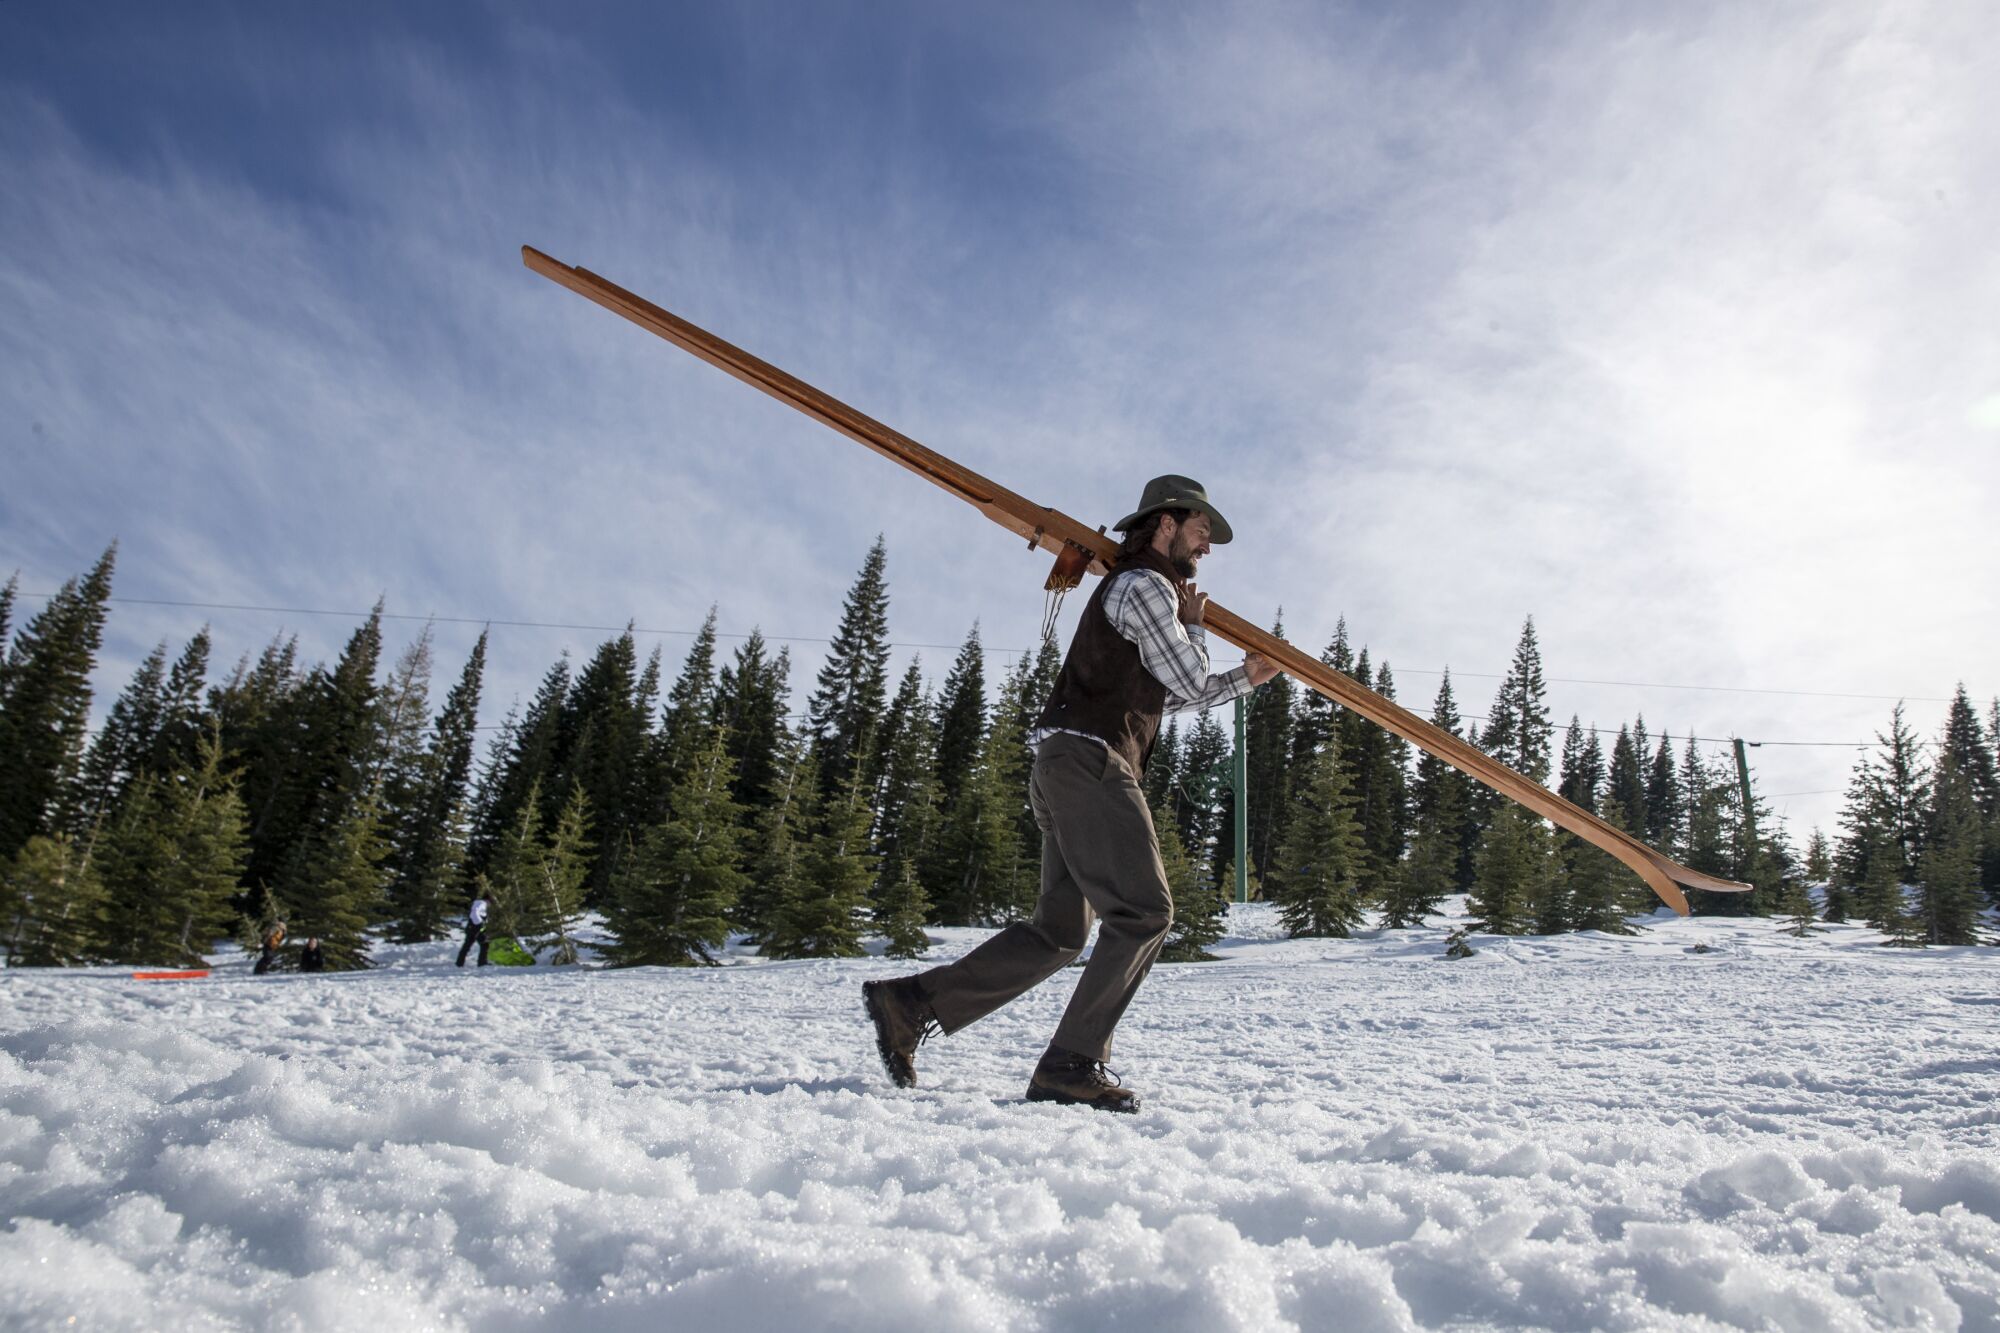 A longboard racer carries his skis through the snow